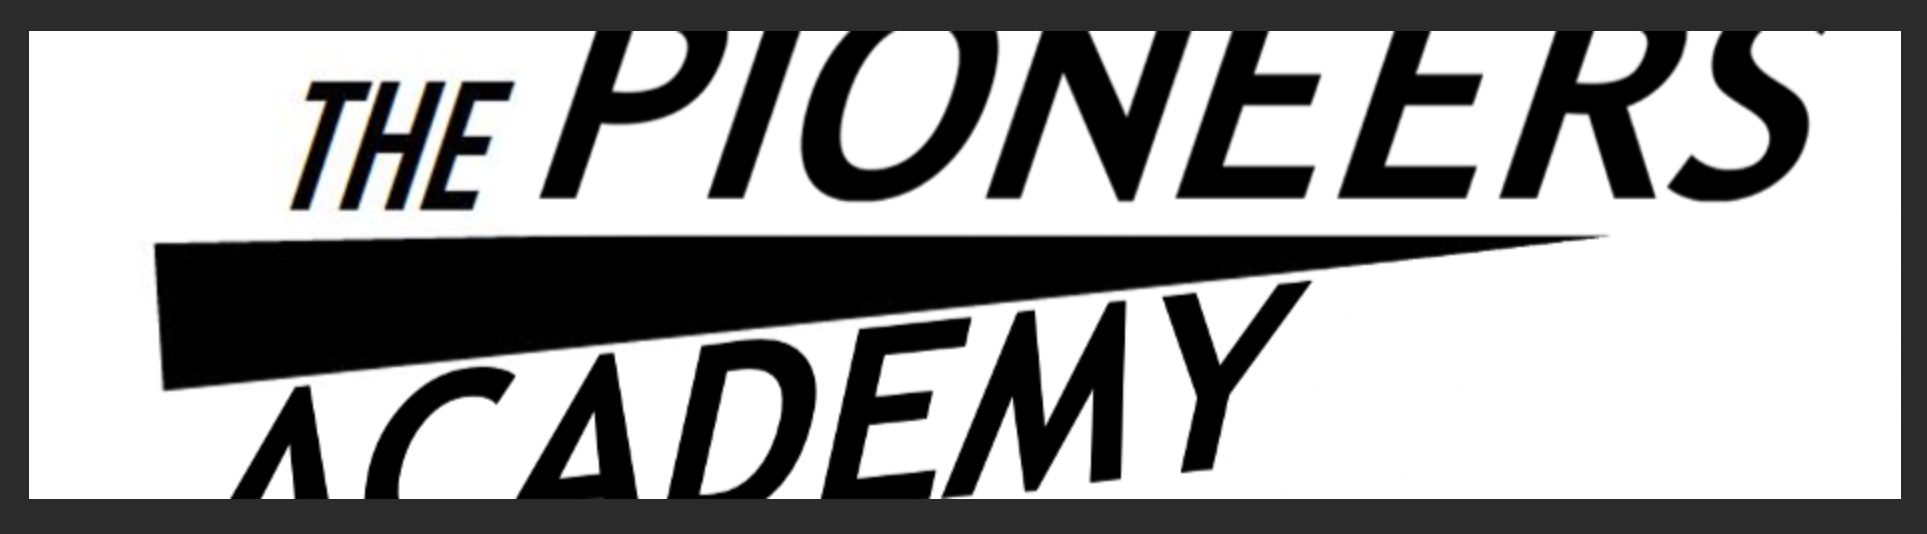 Pioneers Academy – First Cohort